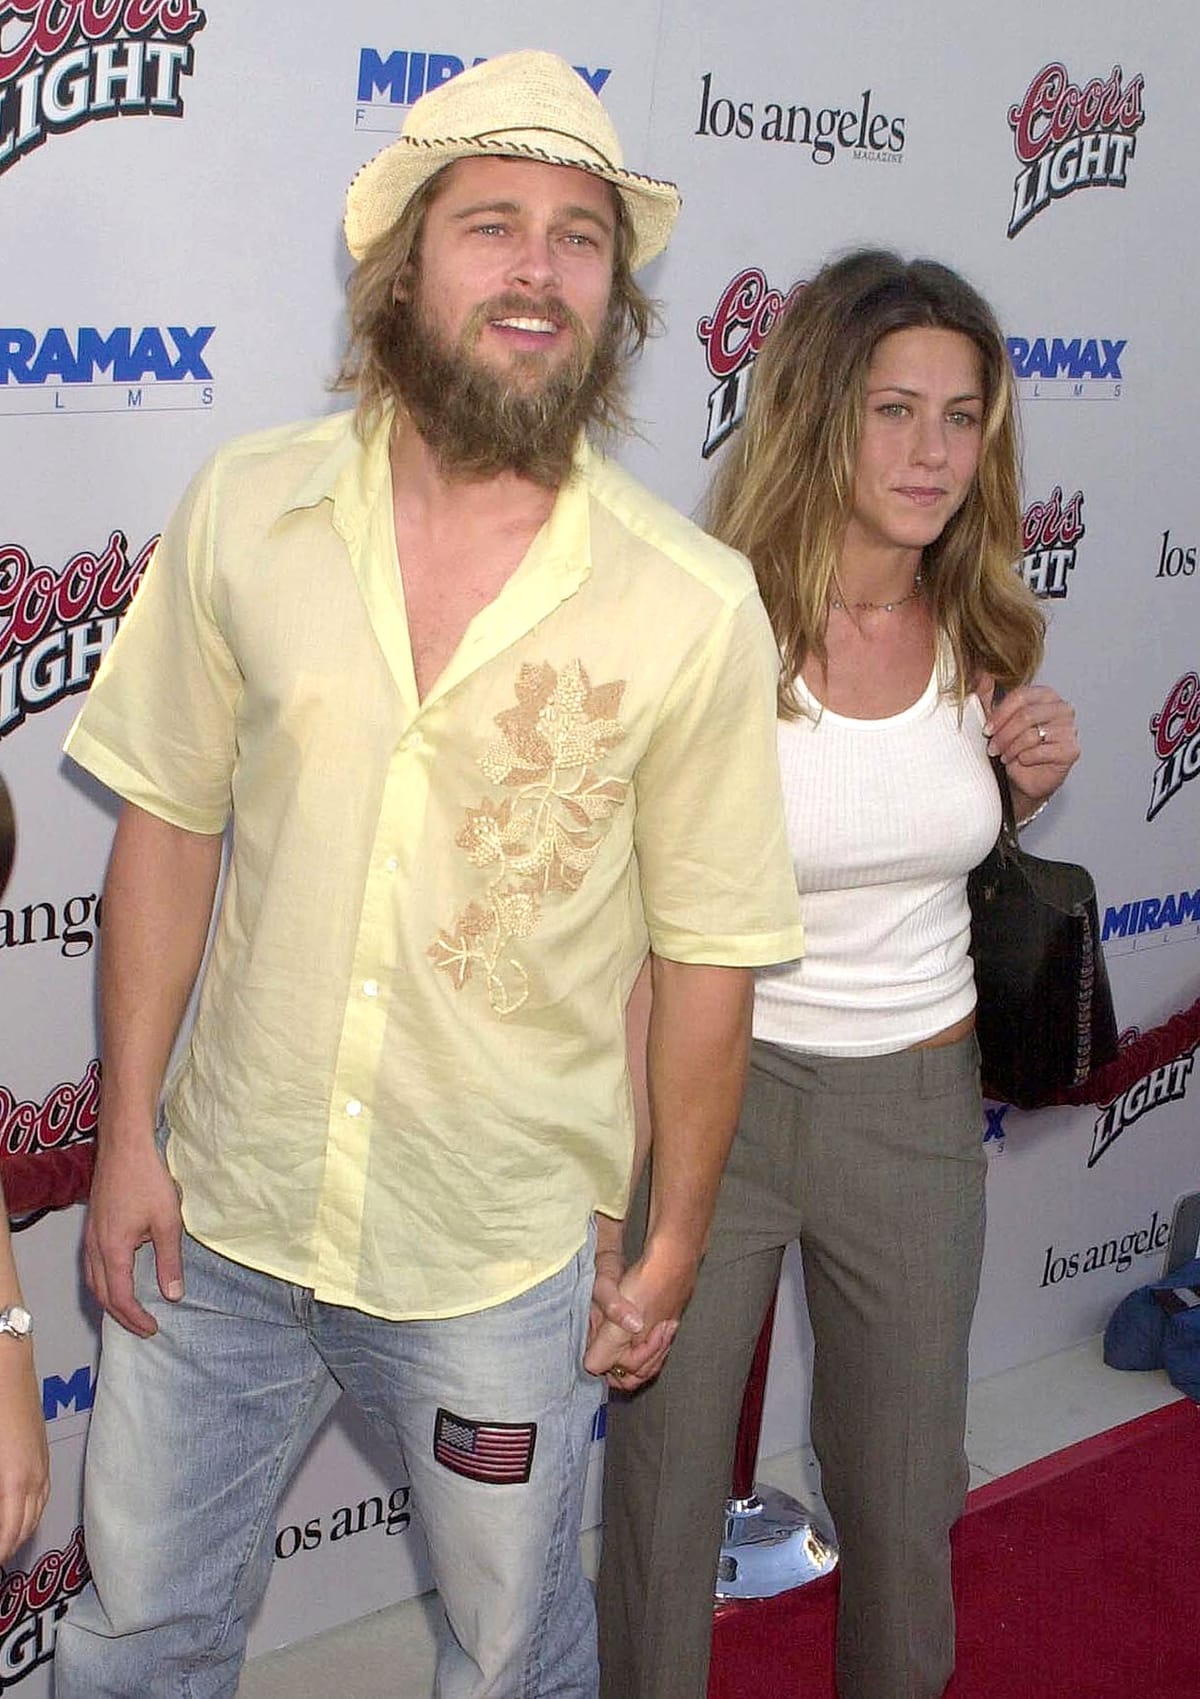 Brad Pitt and Jennifer Aniston have remained friends following their divorce